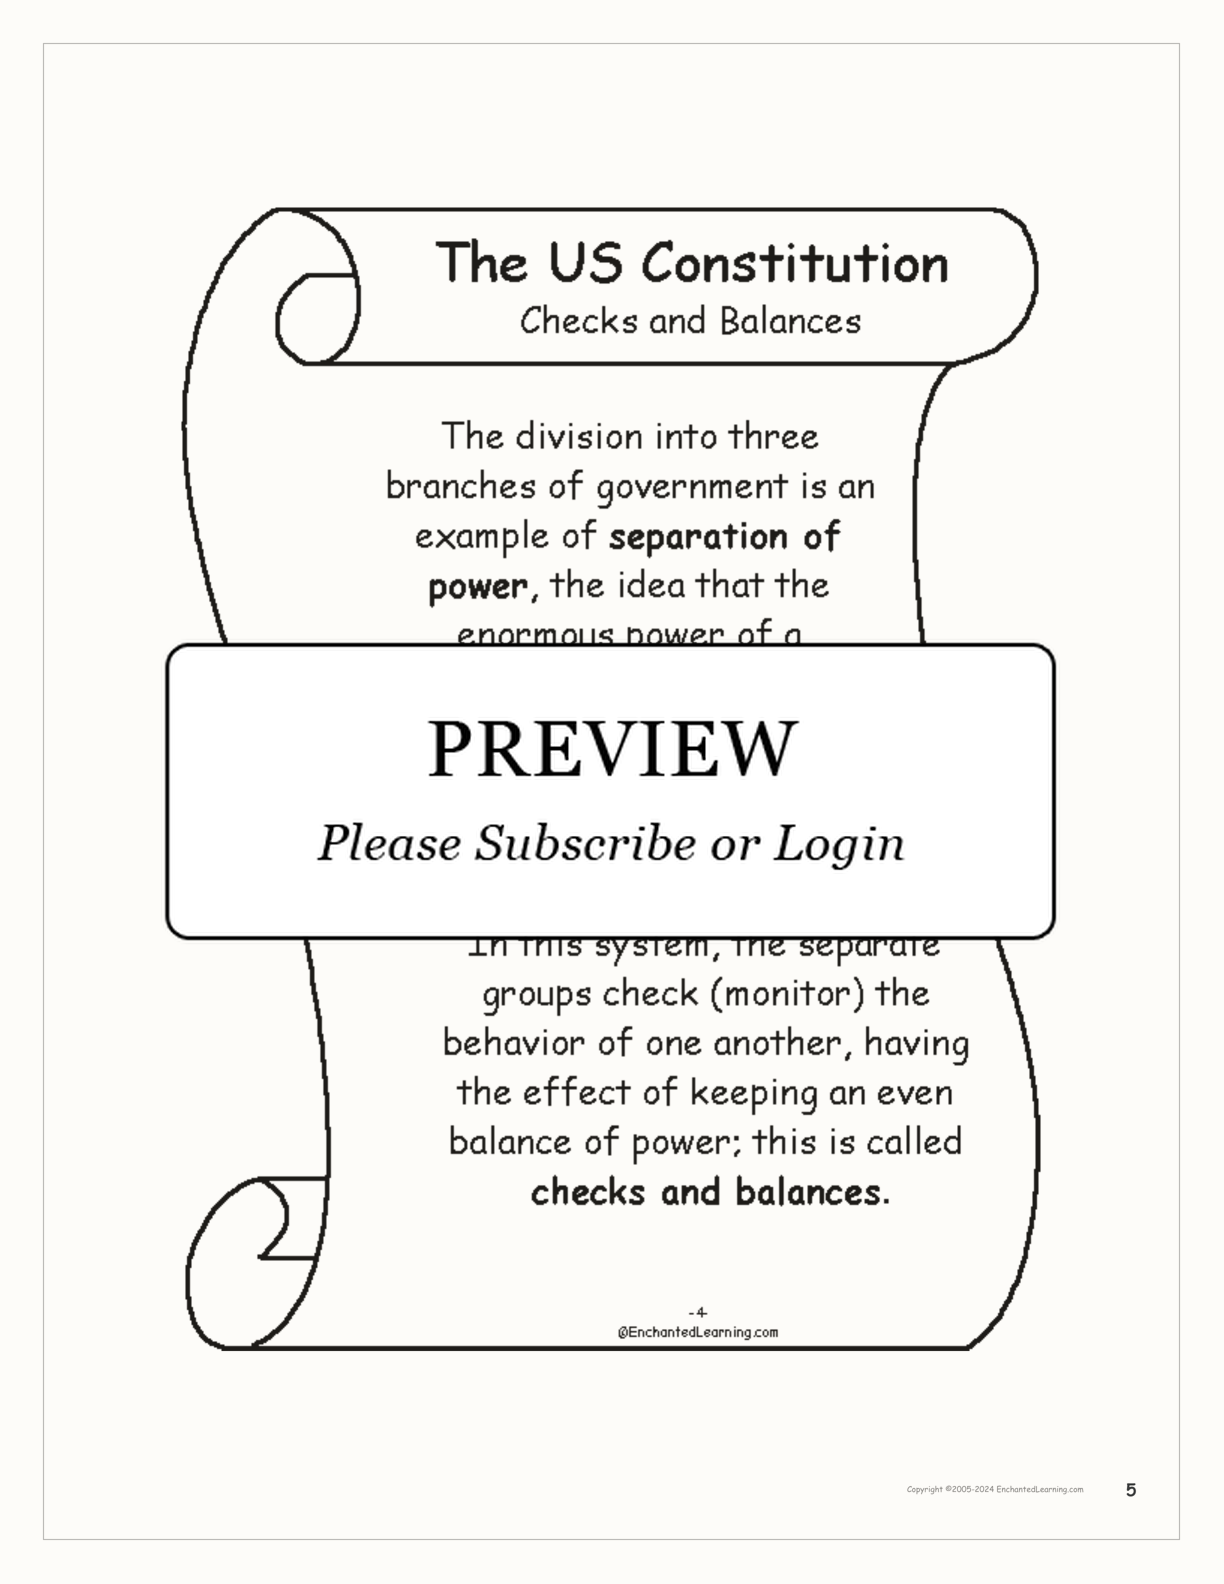 US Constitution Book interactive printout page 5